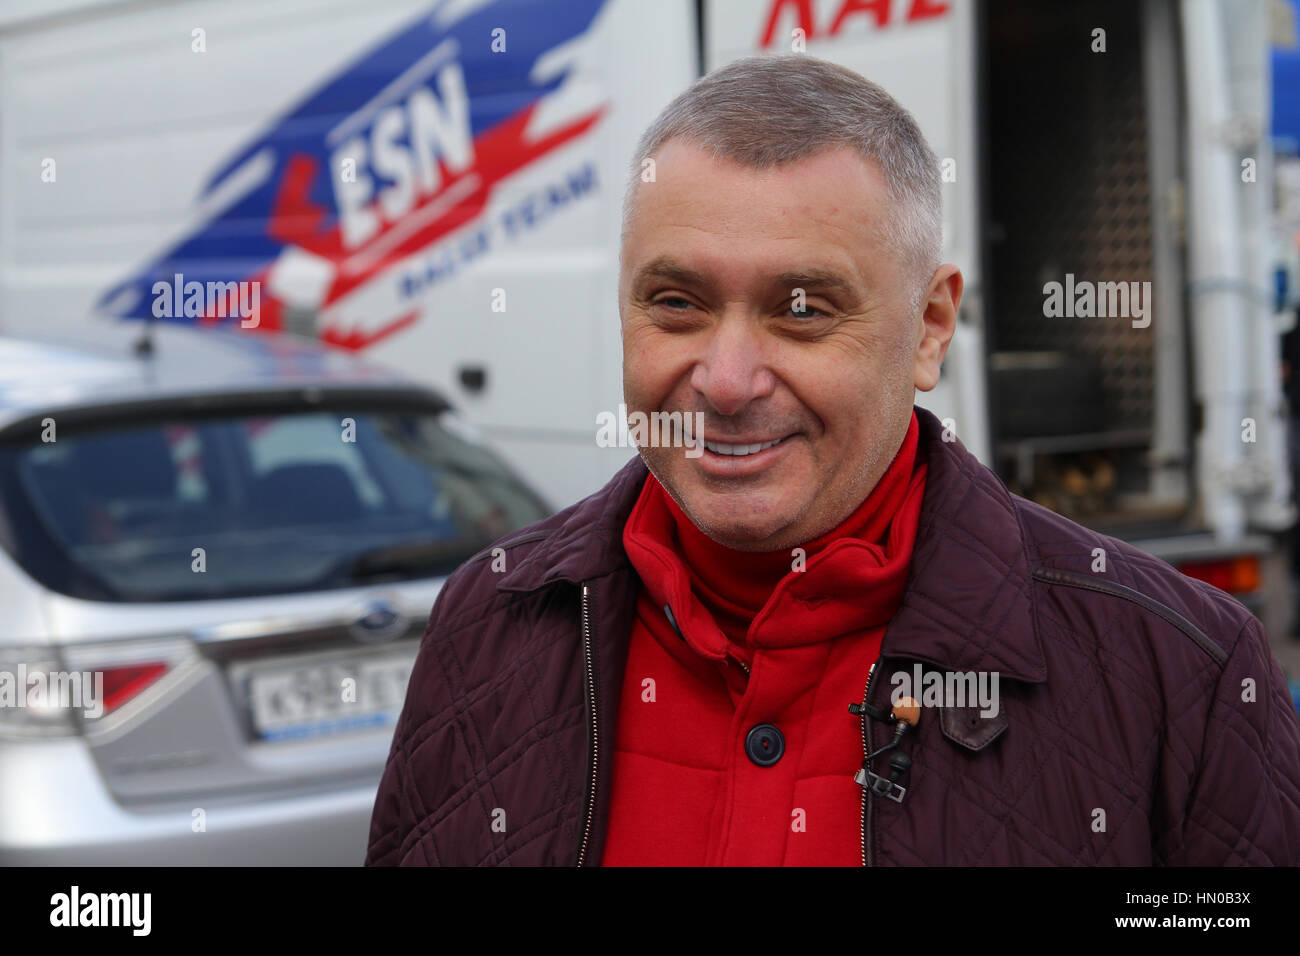 Moscow, Russia - Apr 18, 2015: Head of Department of Physical Fitness and Sports Moscomsport Alexey Vorobyov during Rally Masters Show 2015 at Krylats Stock Photo